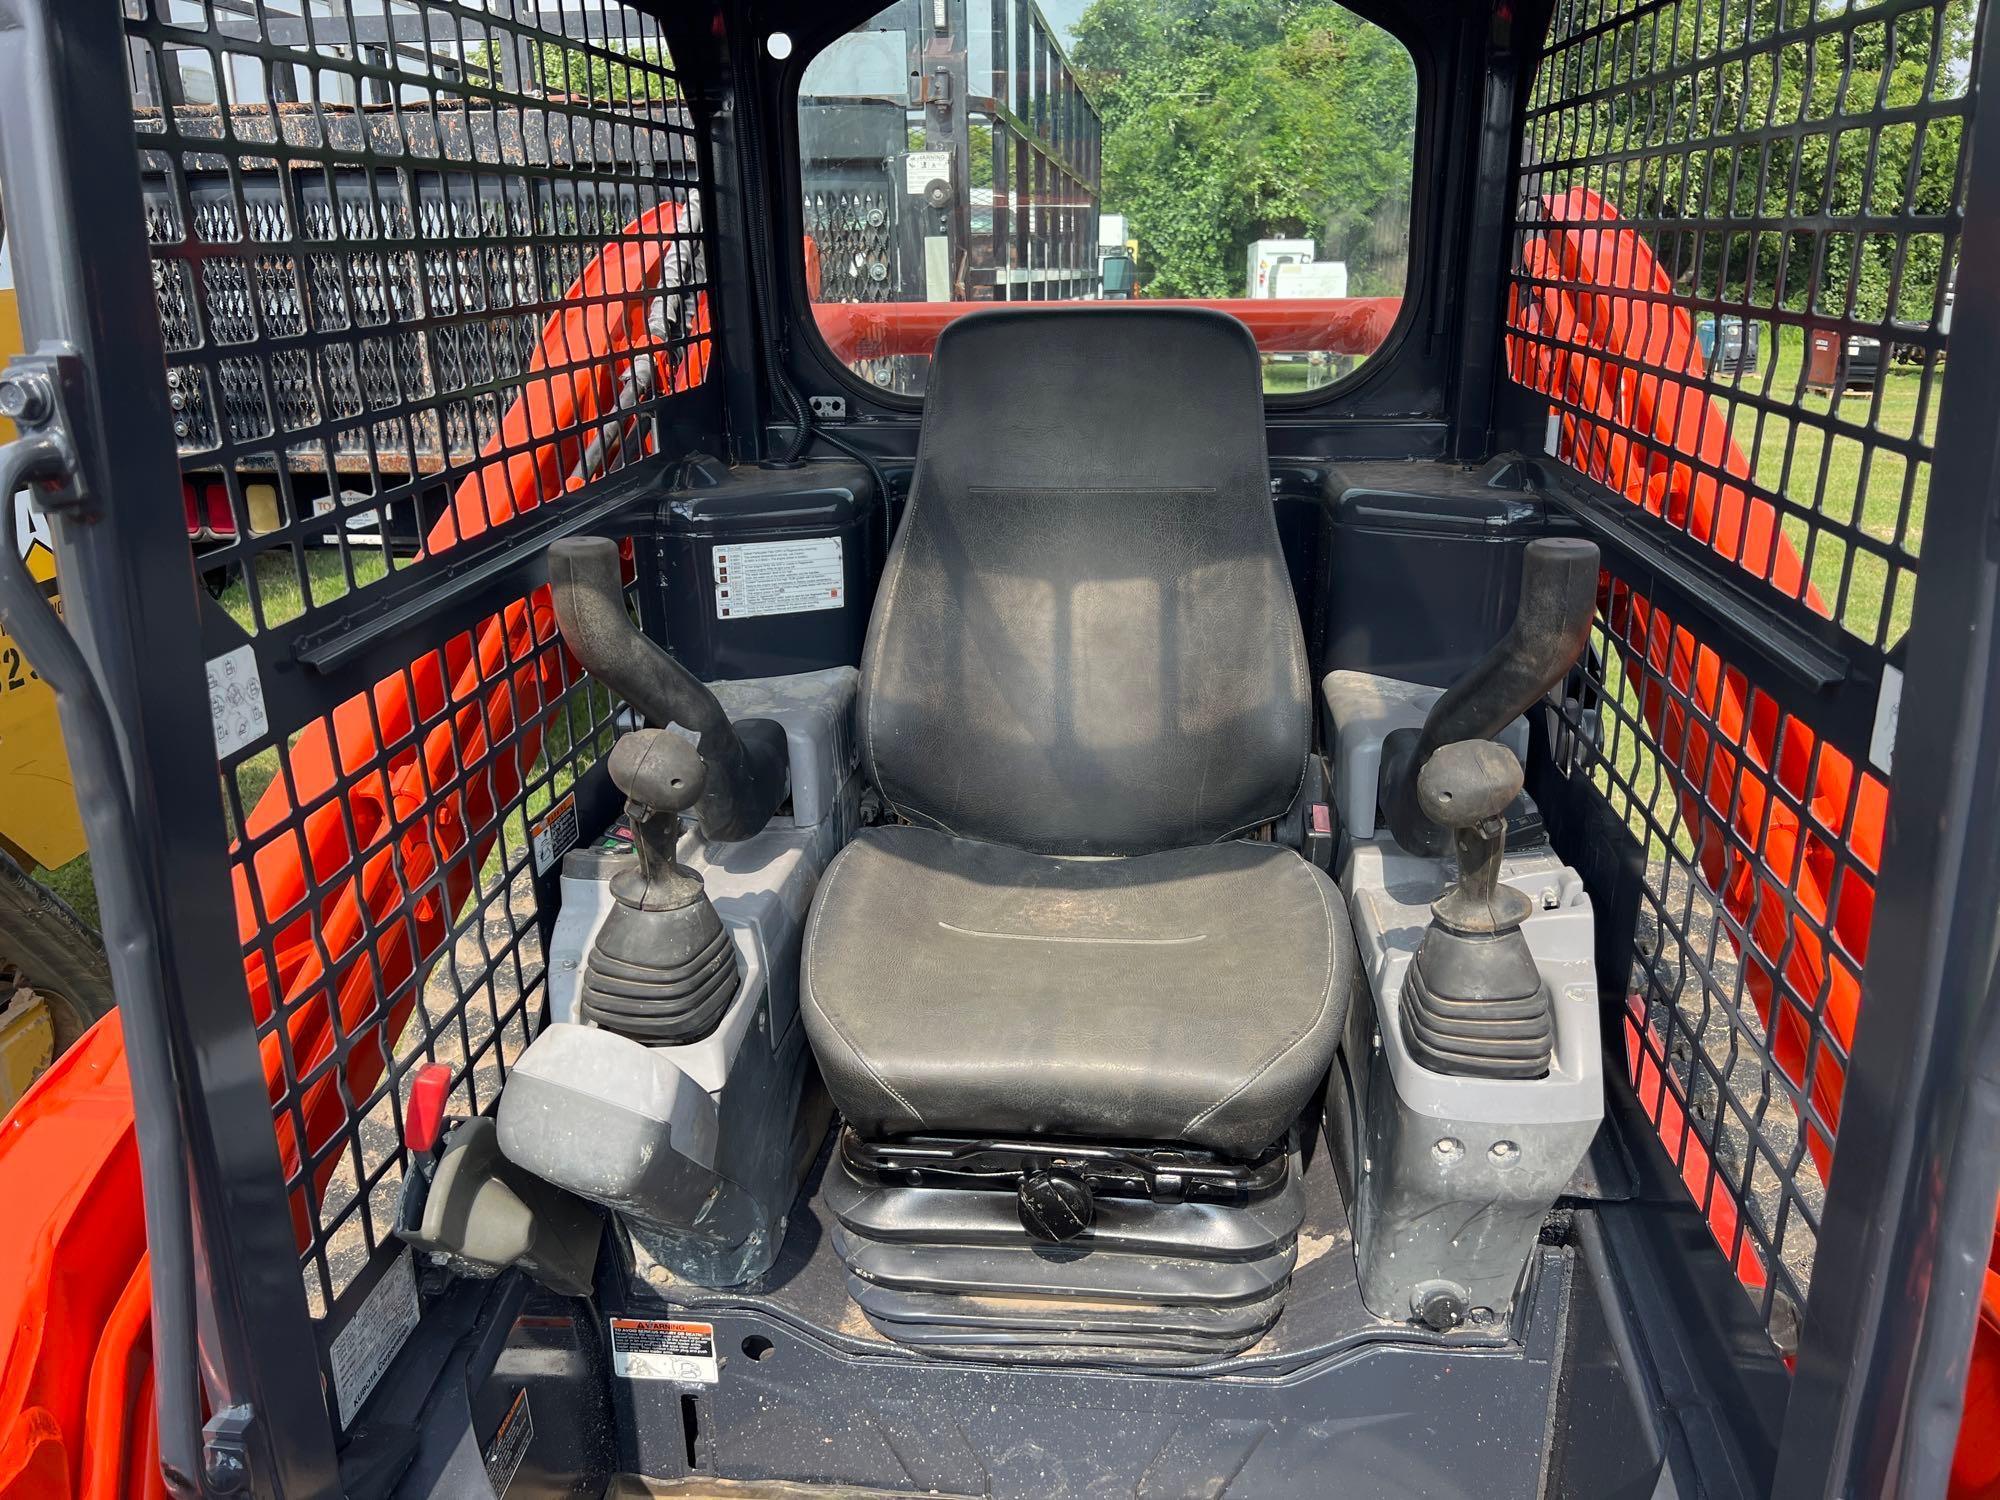 2021 KUBOTA SV75 RUBBER TRACKED SKID STEER SN:31632 powered by Kubota diesel engine, equipped with